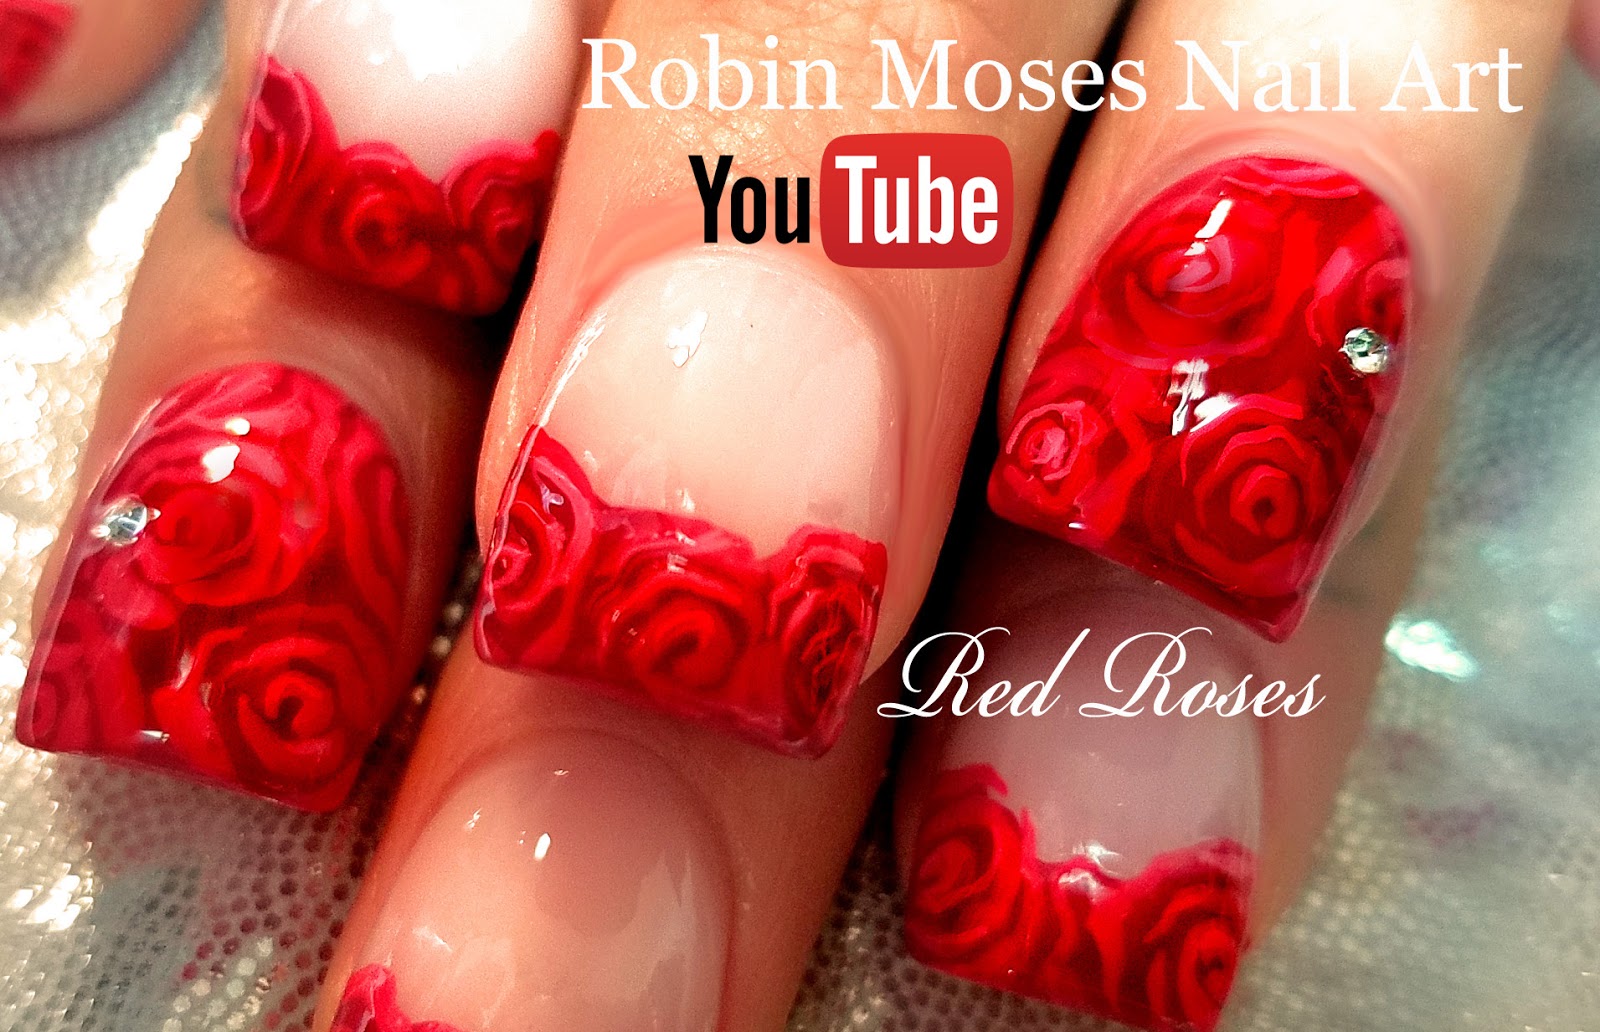 2. "DIY Rose Nail Art with Crystals" - wide 3